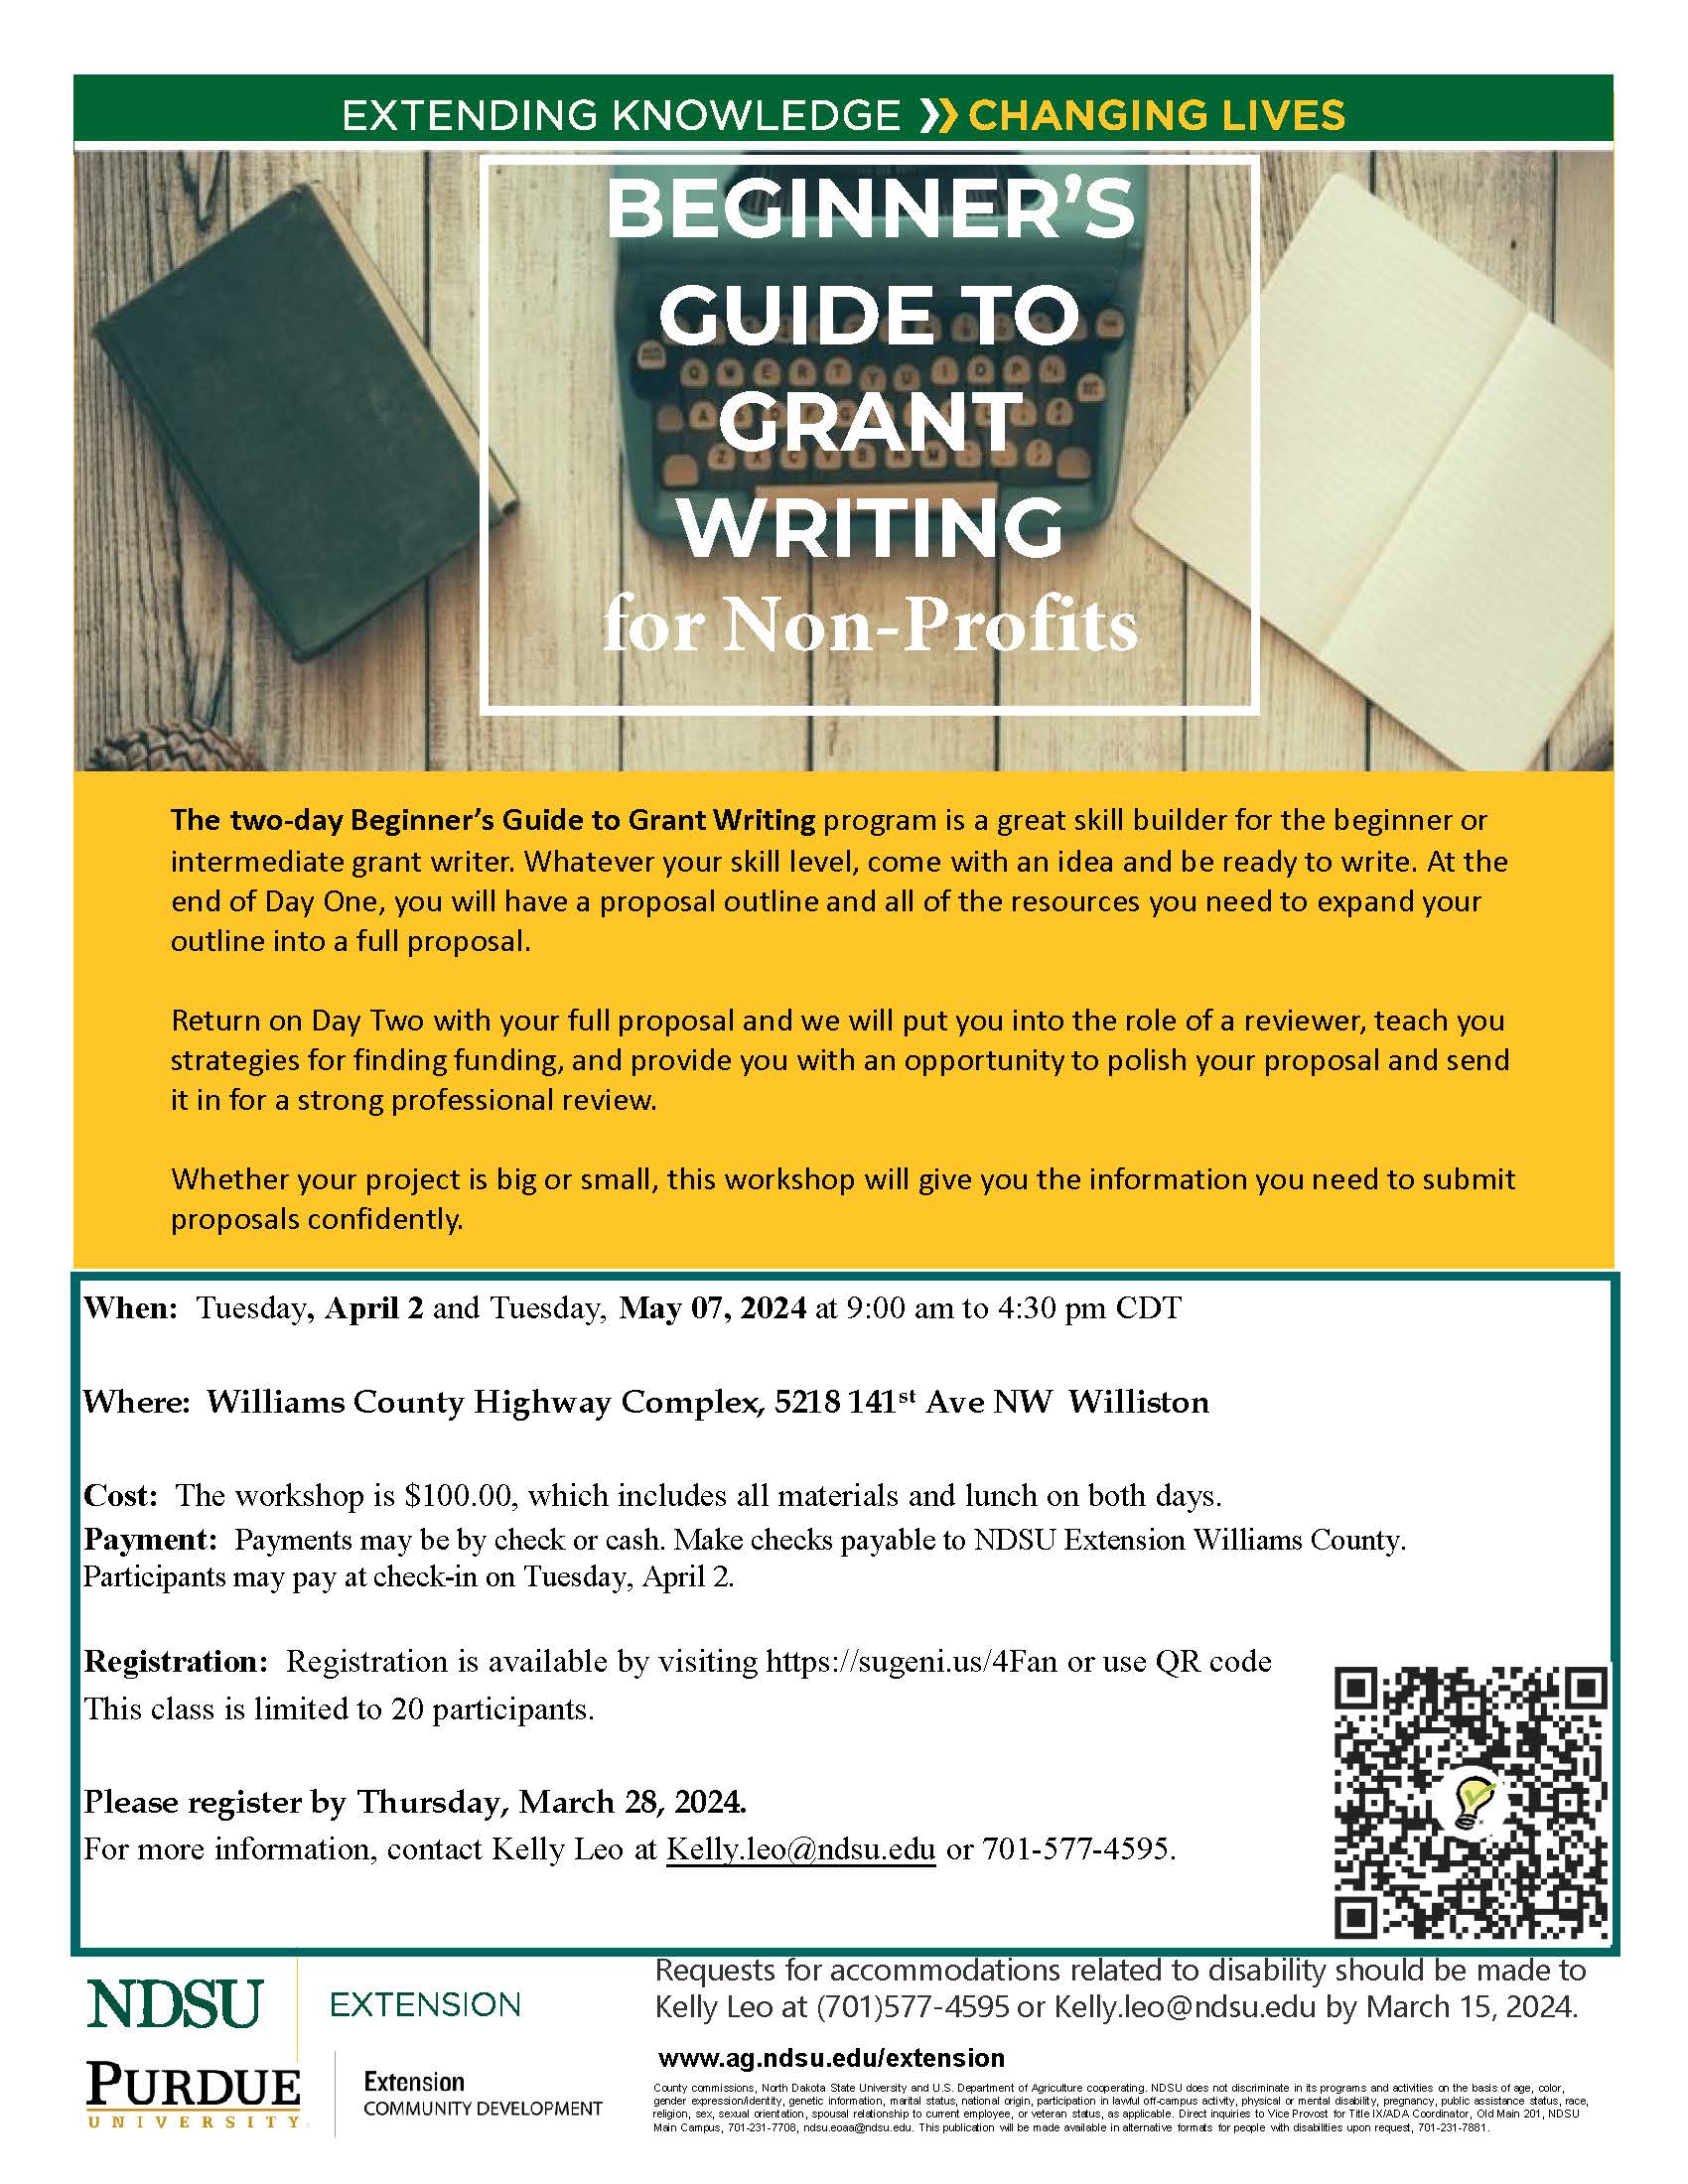 Flyer Grant Writing Workshop for Non-Profits April 2 Call 701-577-4595 for more information.